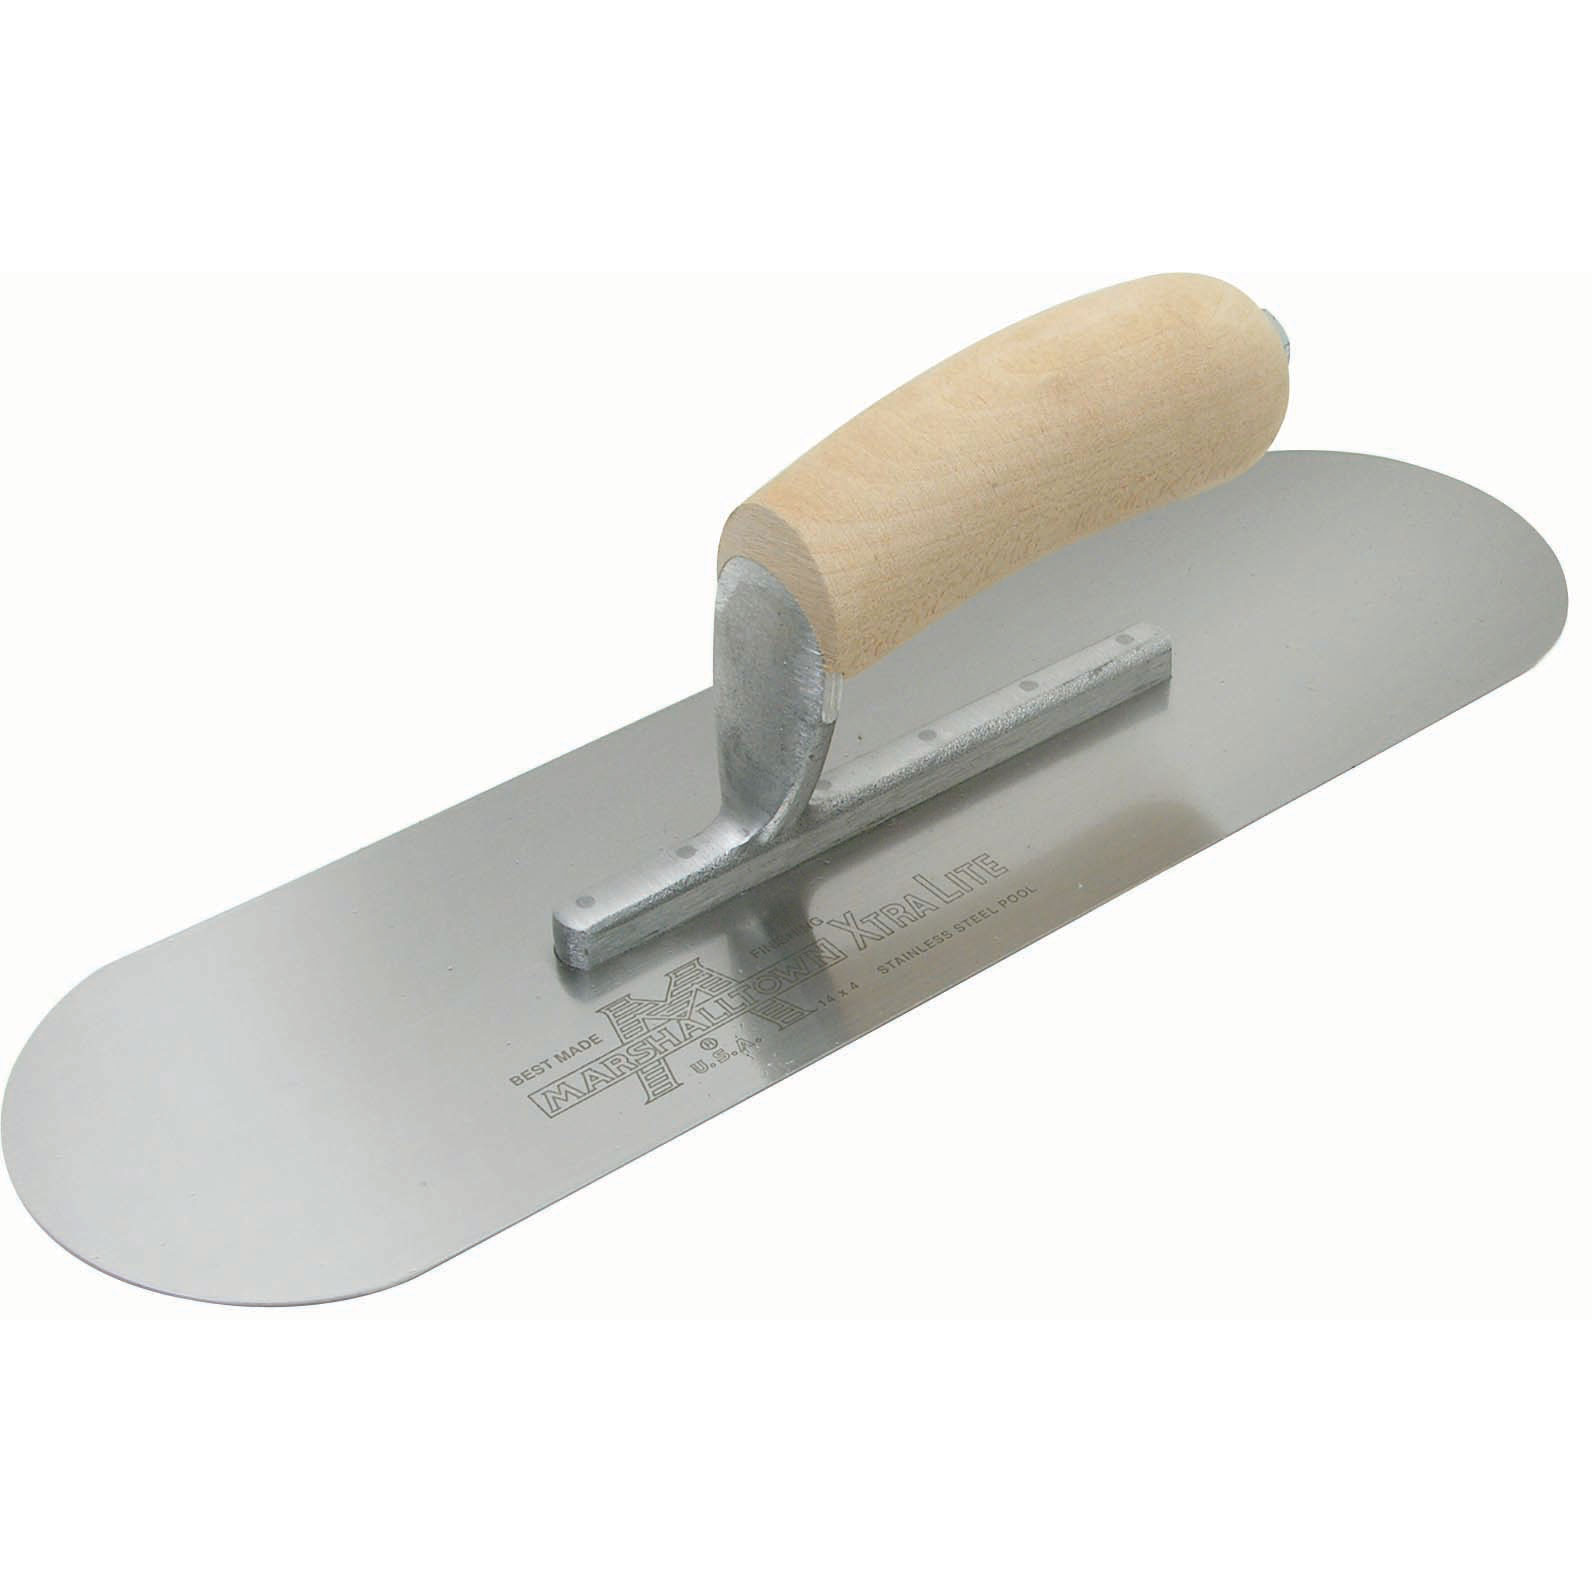 Marshalltown SP14SS 14in x 4in Stainless Steel Pool Trowel with Wood Handle SP14SS